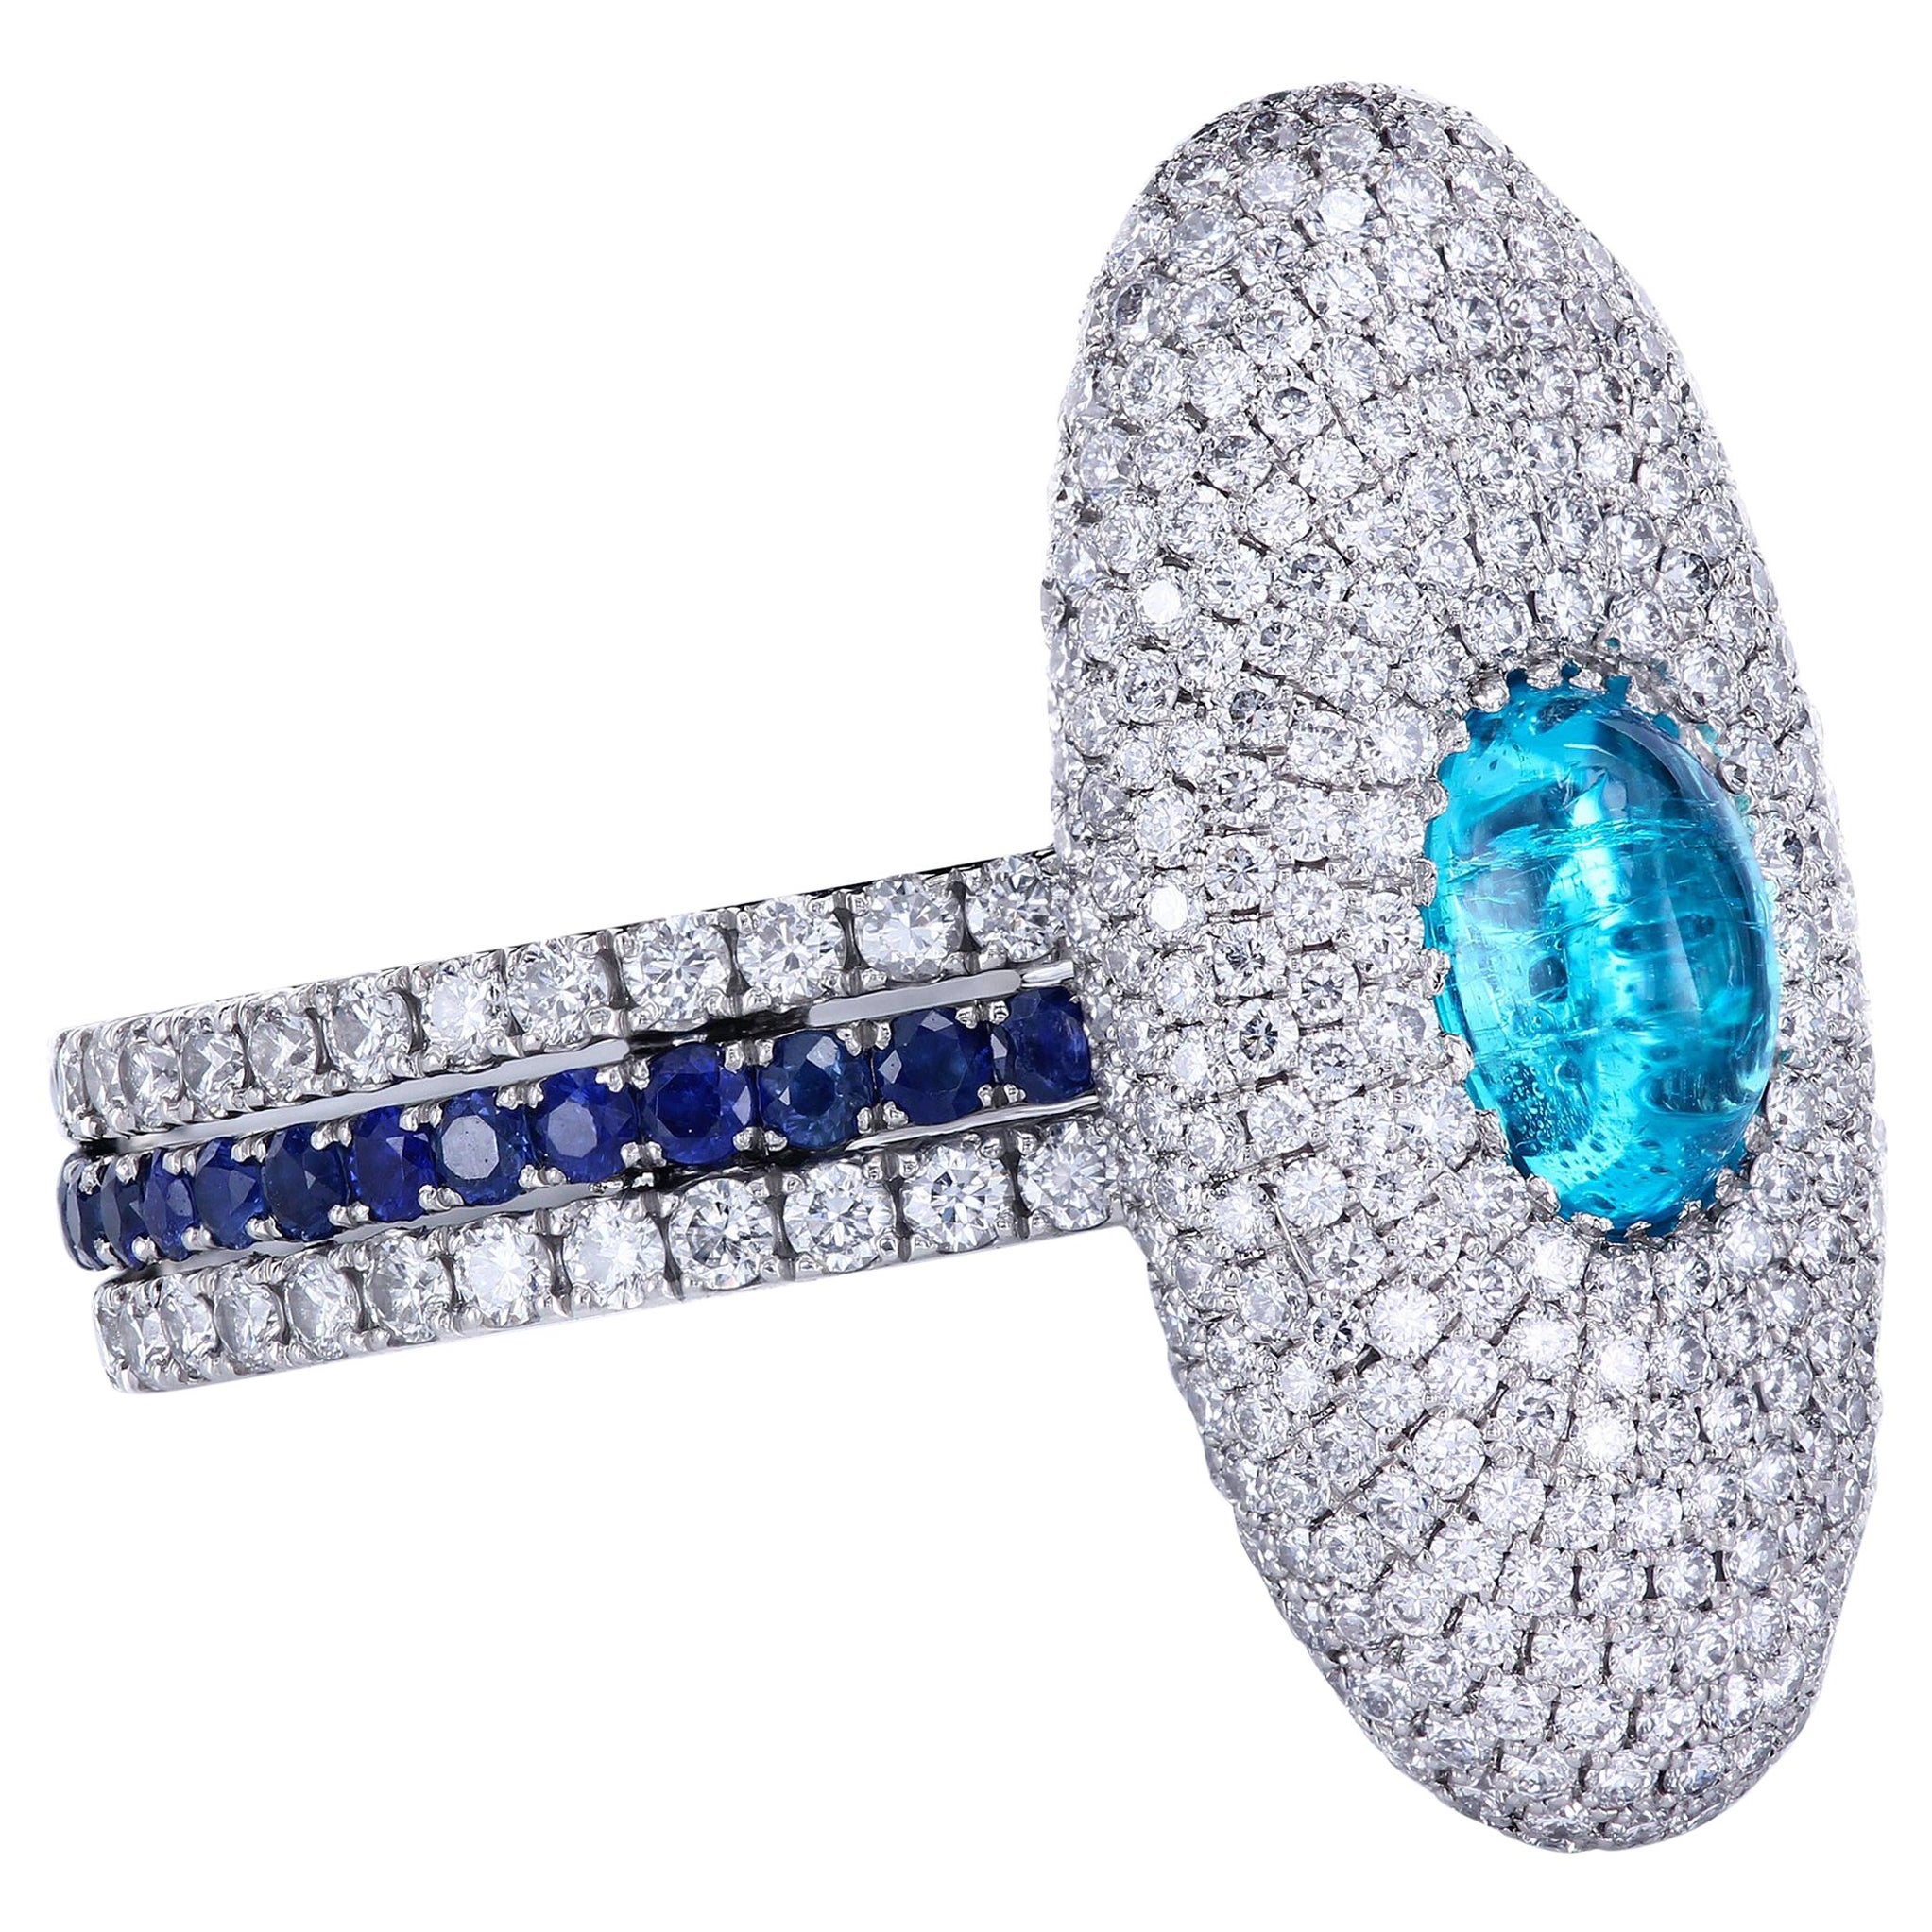 Genuine Brazilian Paraiba Tourmaline in a Micro Pave Statement Ring by Leon Mege For Sale